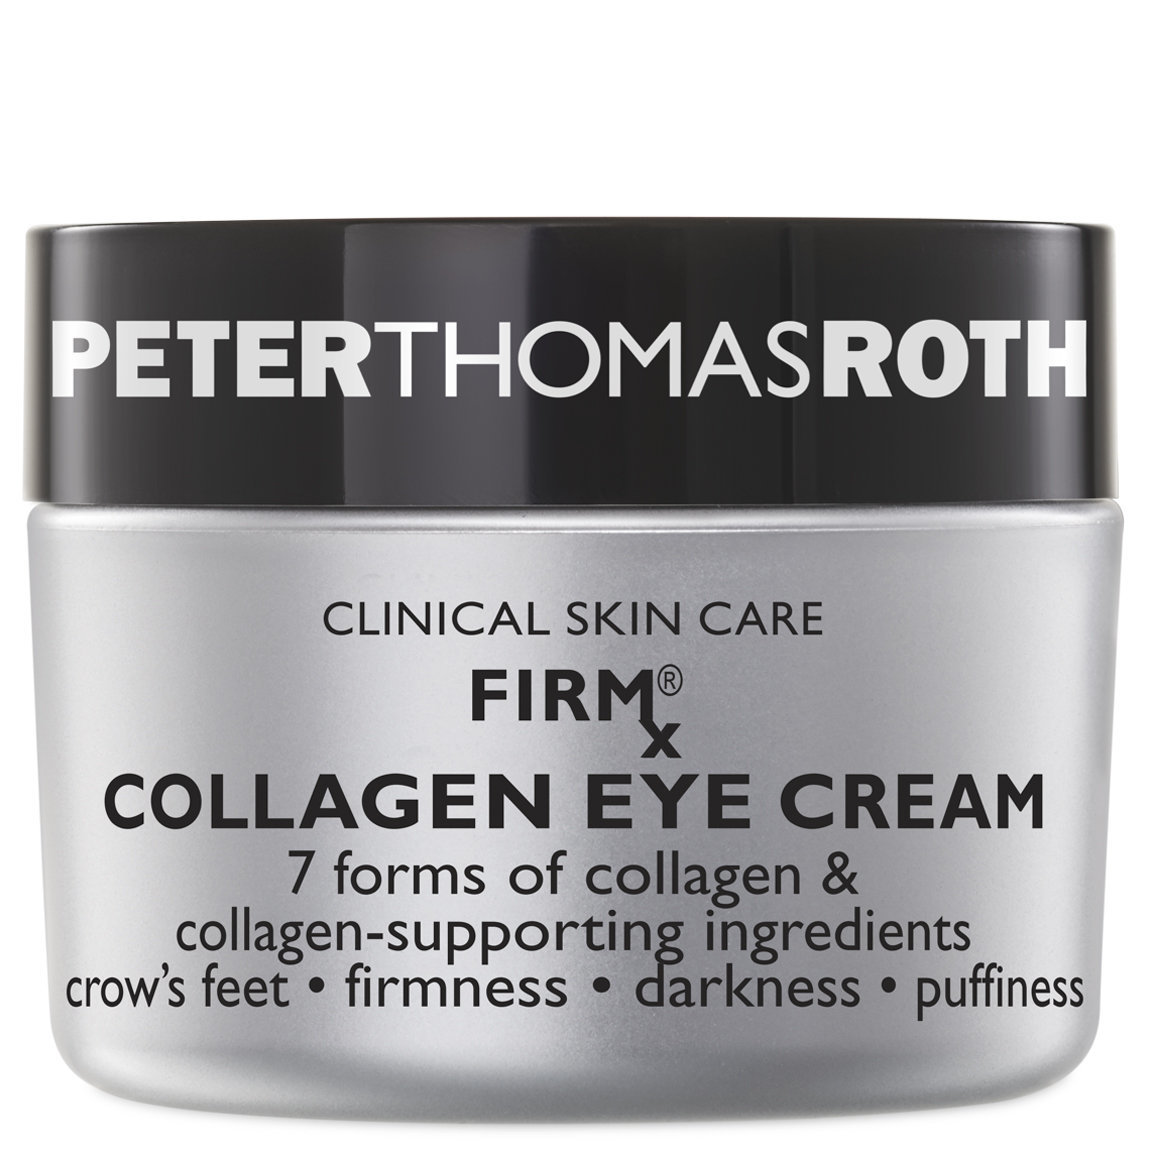 Peter Thomas Roth FIRMx Collagen Eye Cream alternative view 1 - product swatch.